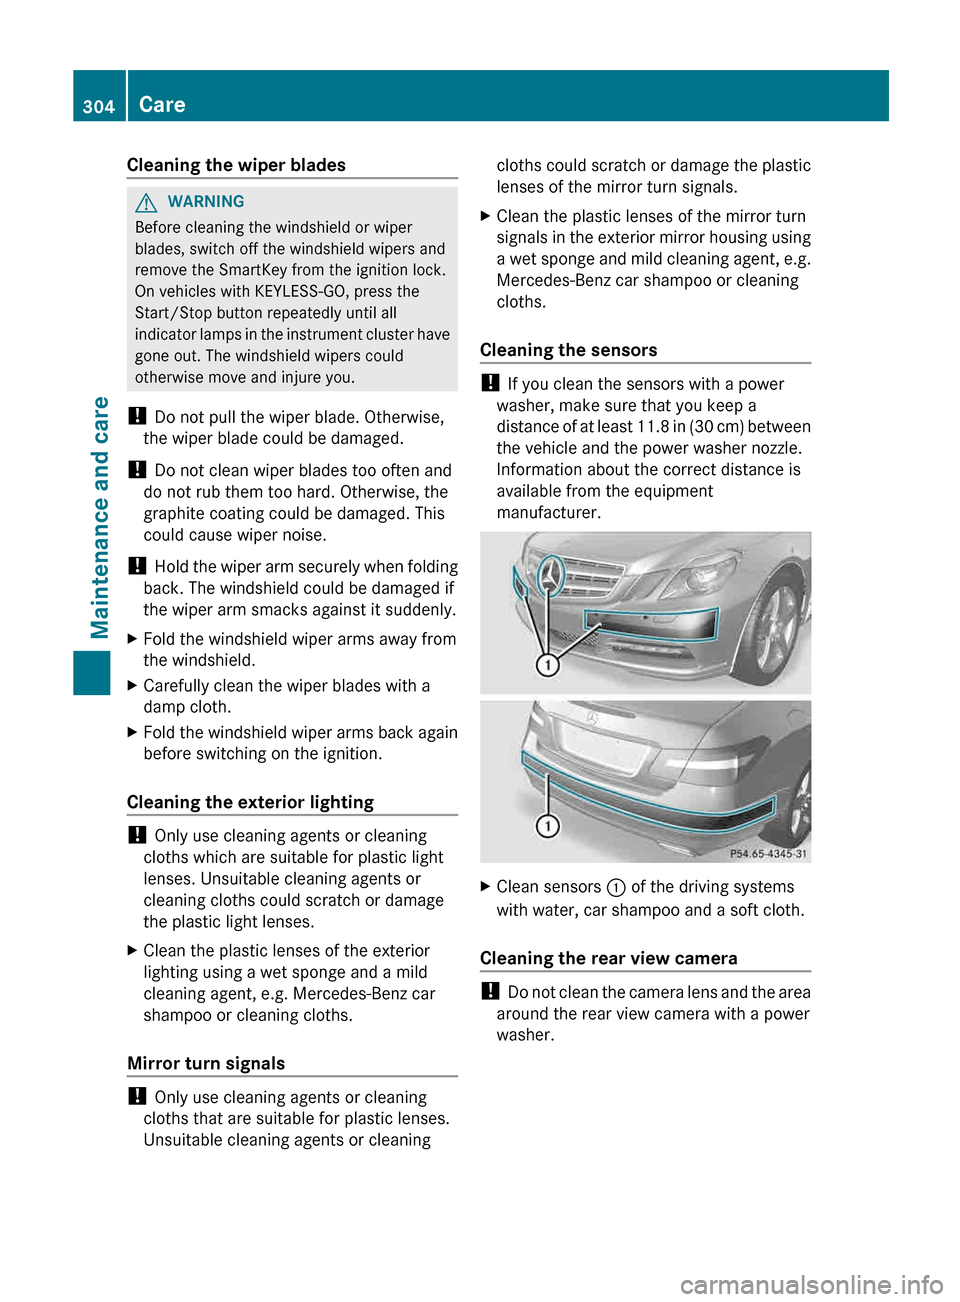 MERCEDES-BENZ E-Class COUPE 2013 C207 Owners Manual Cleaning the wiper blades
G
WARNING
Before cleaning the windshield or wiper
blades, switch off the windshield wipers and
remove the SmartKey from the ignition lock.
On vehicles with KEYLESS-GO, press 